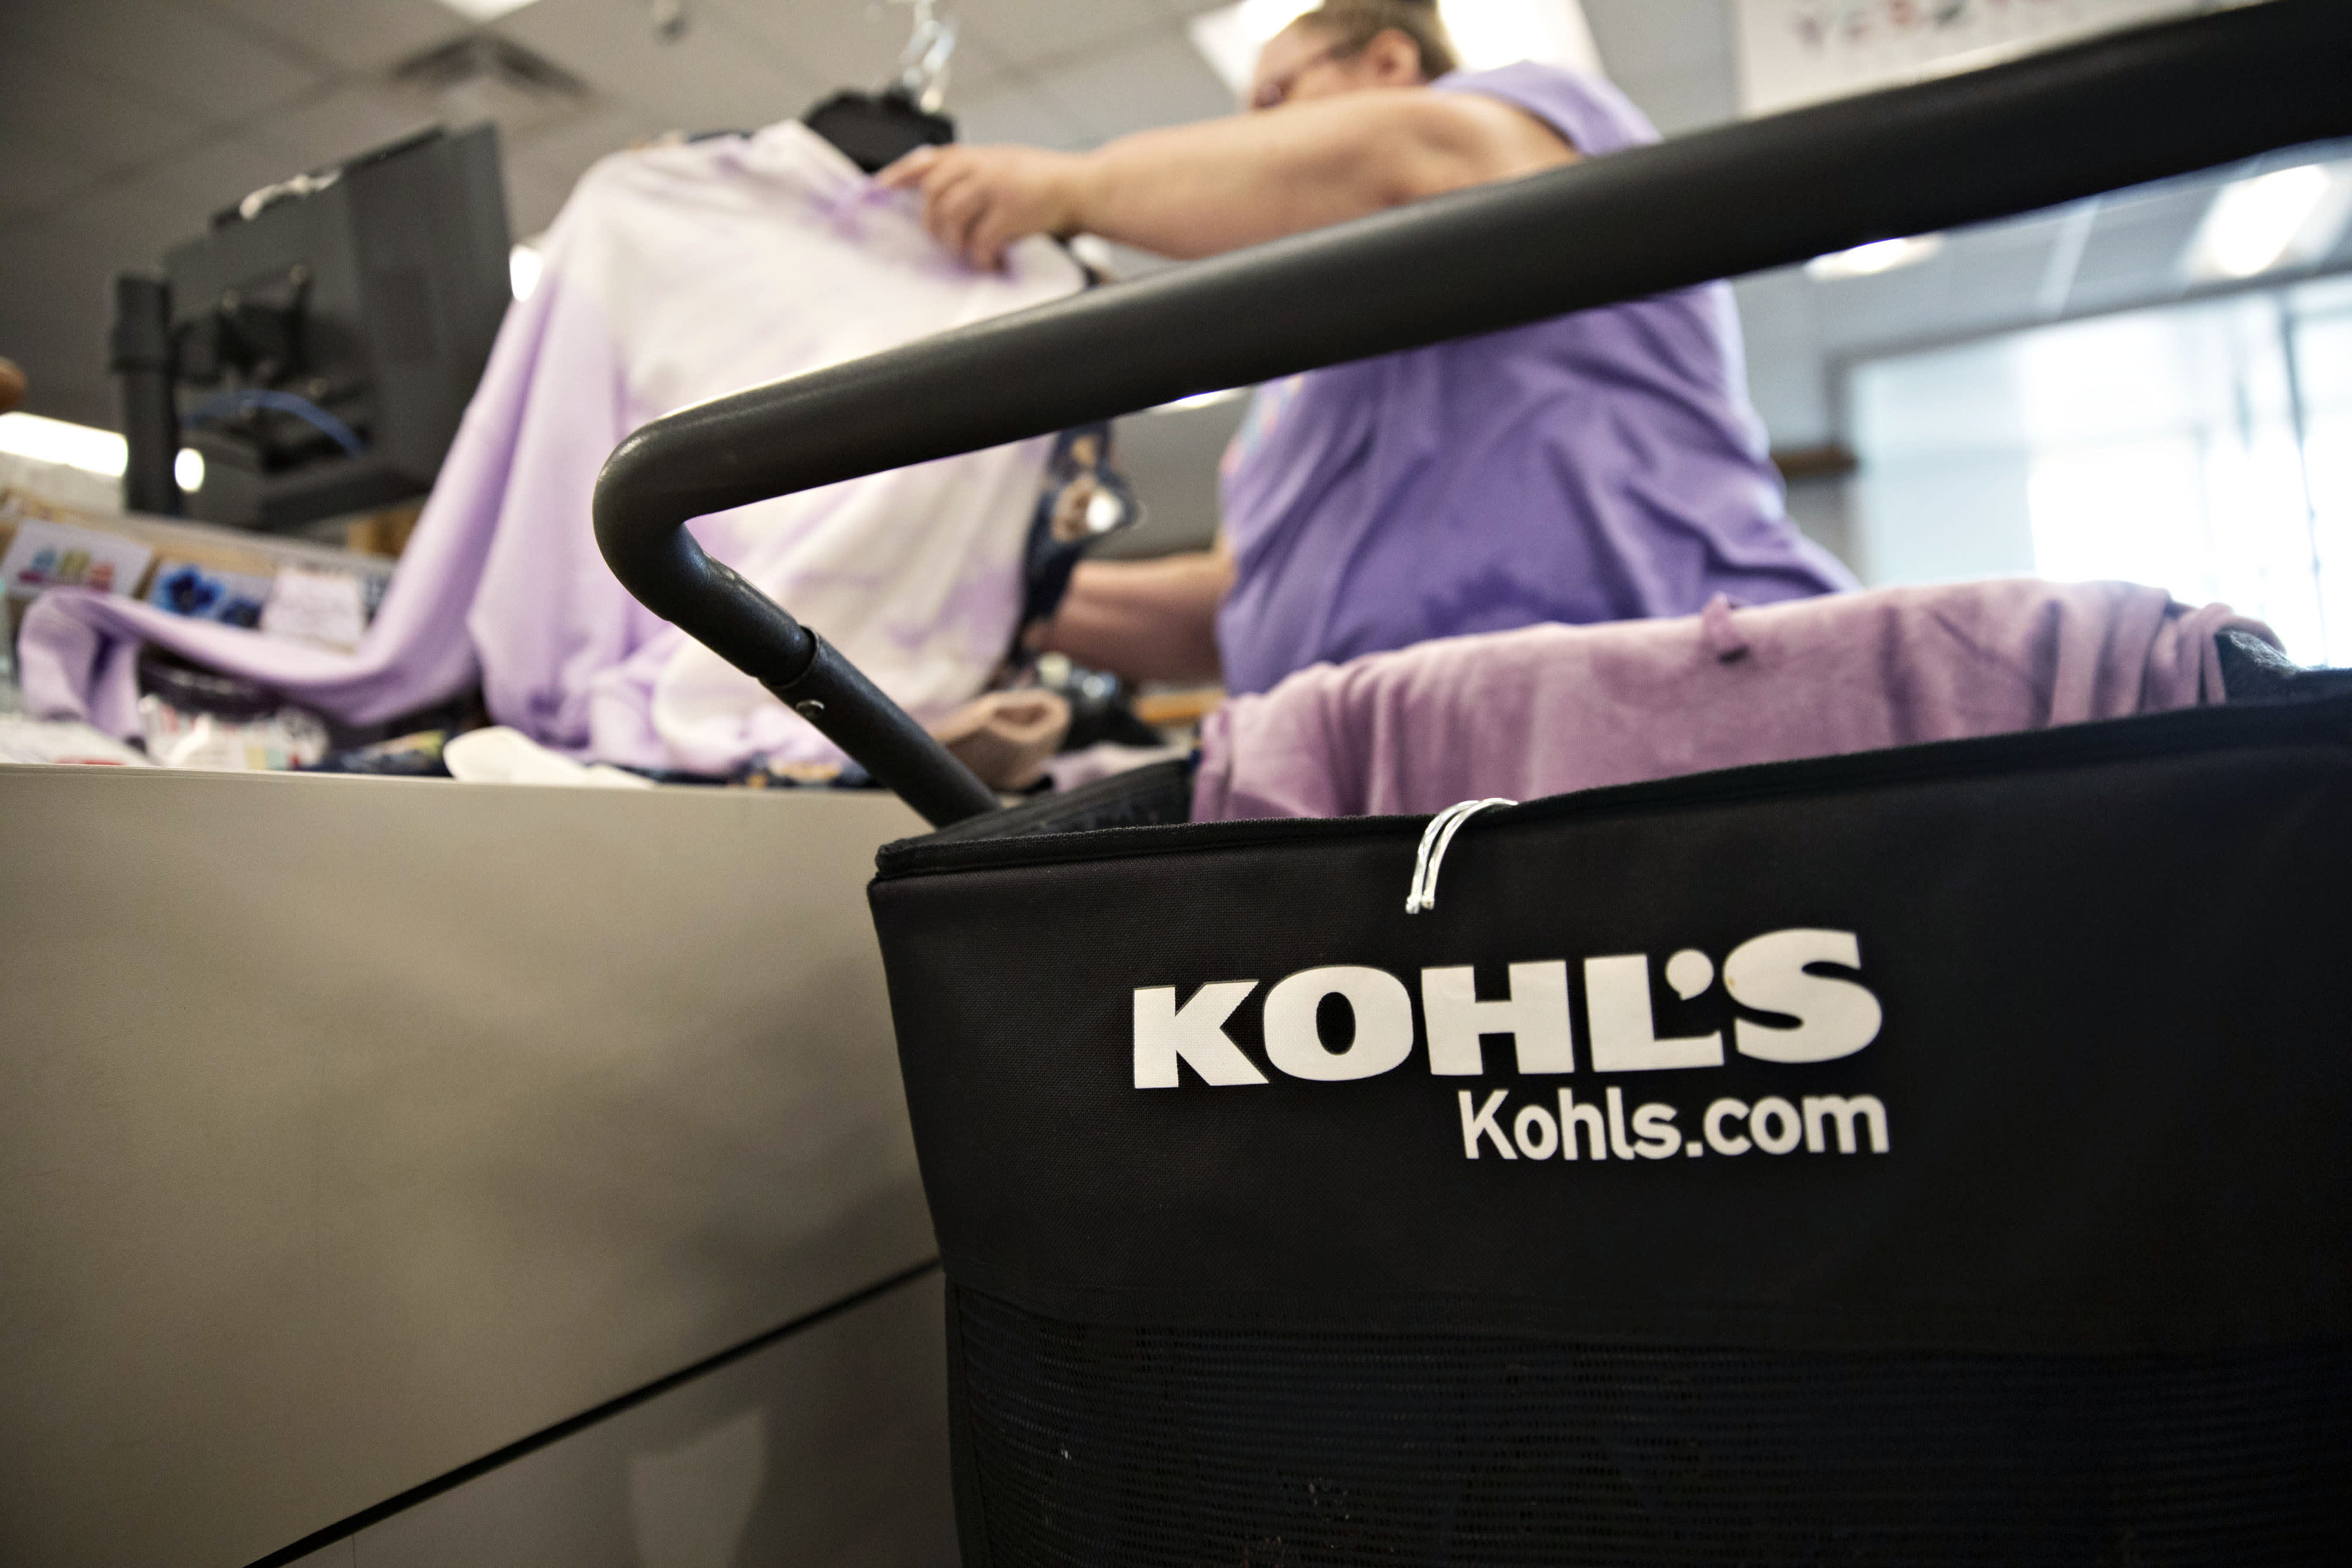 Kohl’s under fresh pressure as Sycamore expresses interest after Acacia made bid